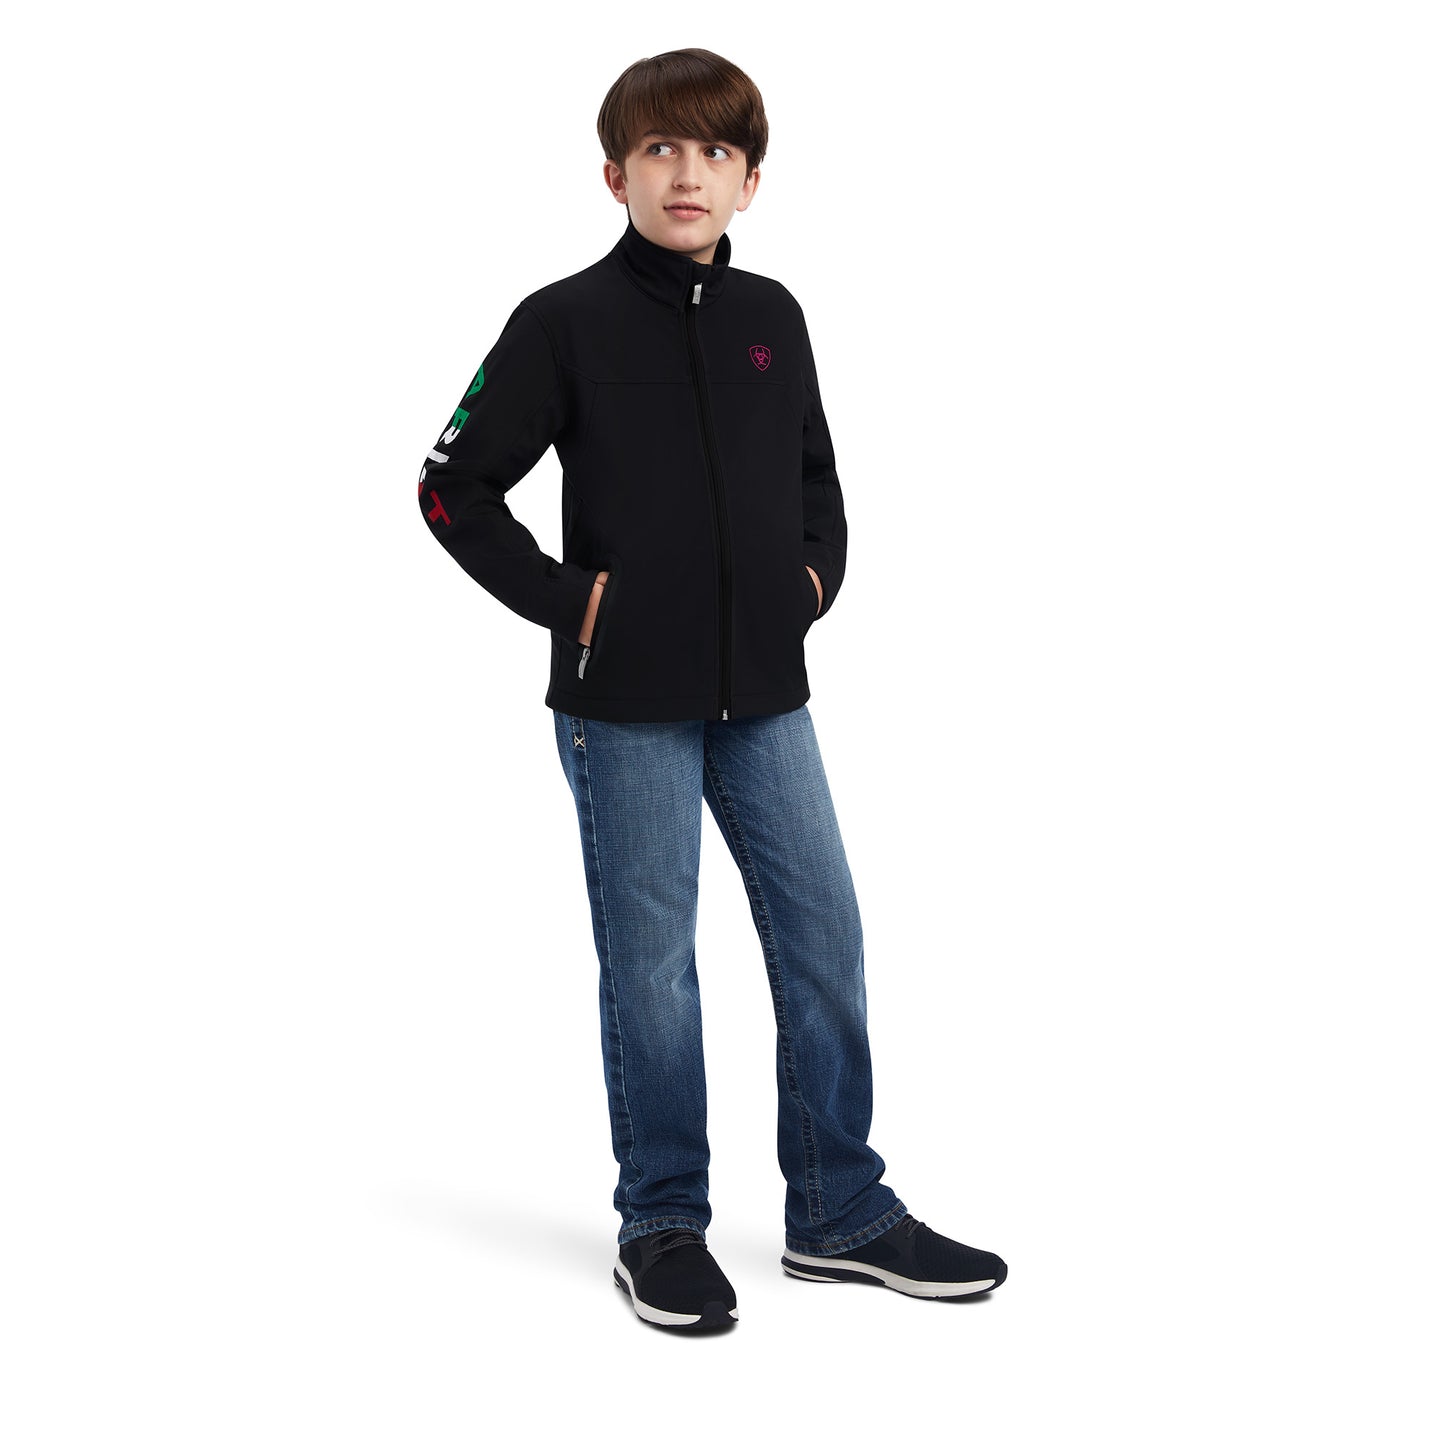 Ariat® Youth Boy's New Team Mexican Black Softshell Jacket 10043053